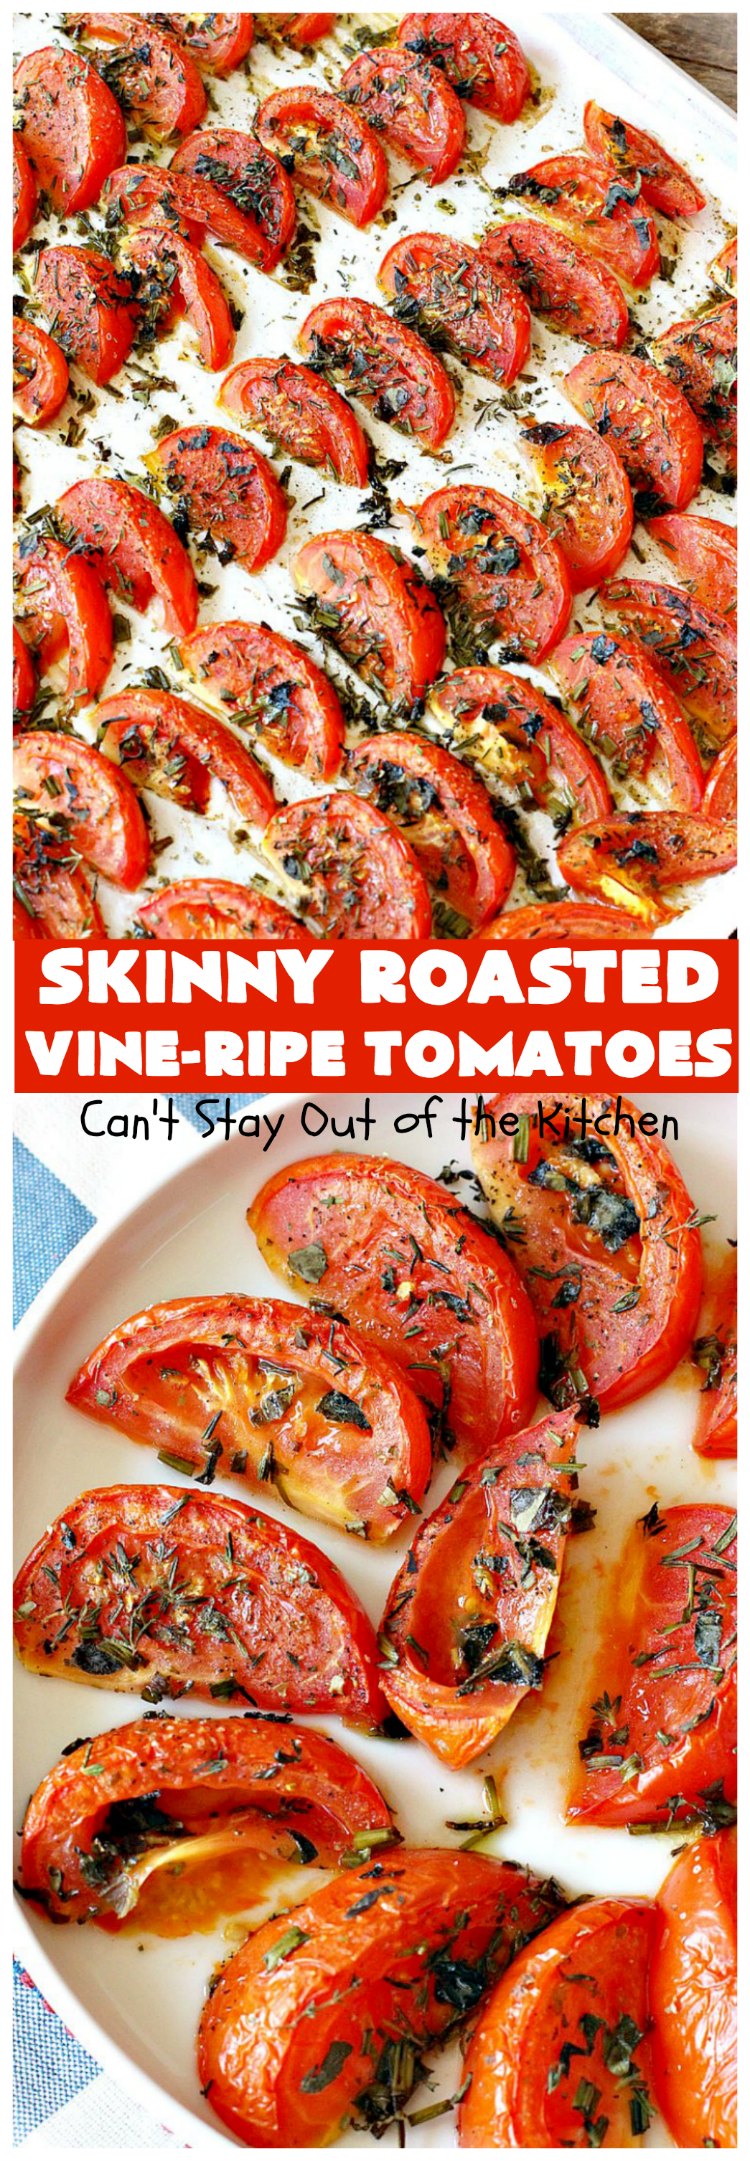 Skinny Roasted Vine-Ripe Tomatoes | Can't Stay Out of the Kitchen